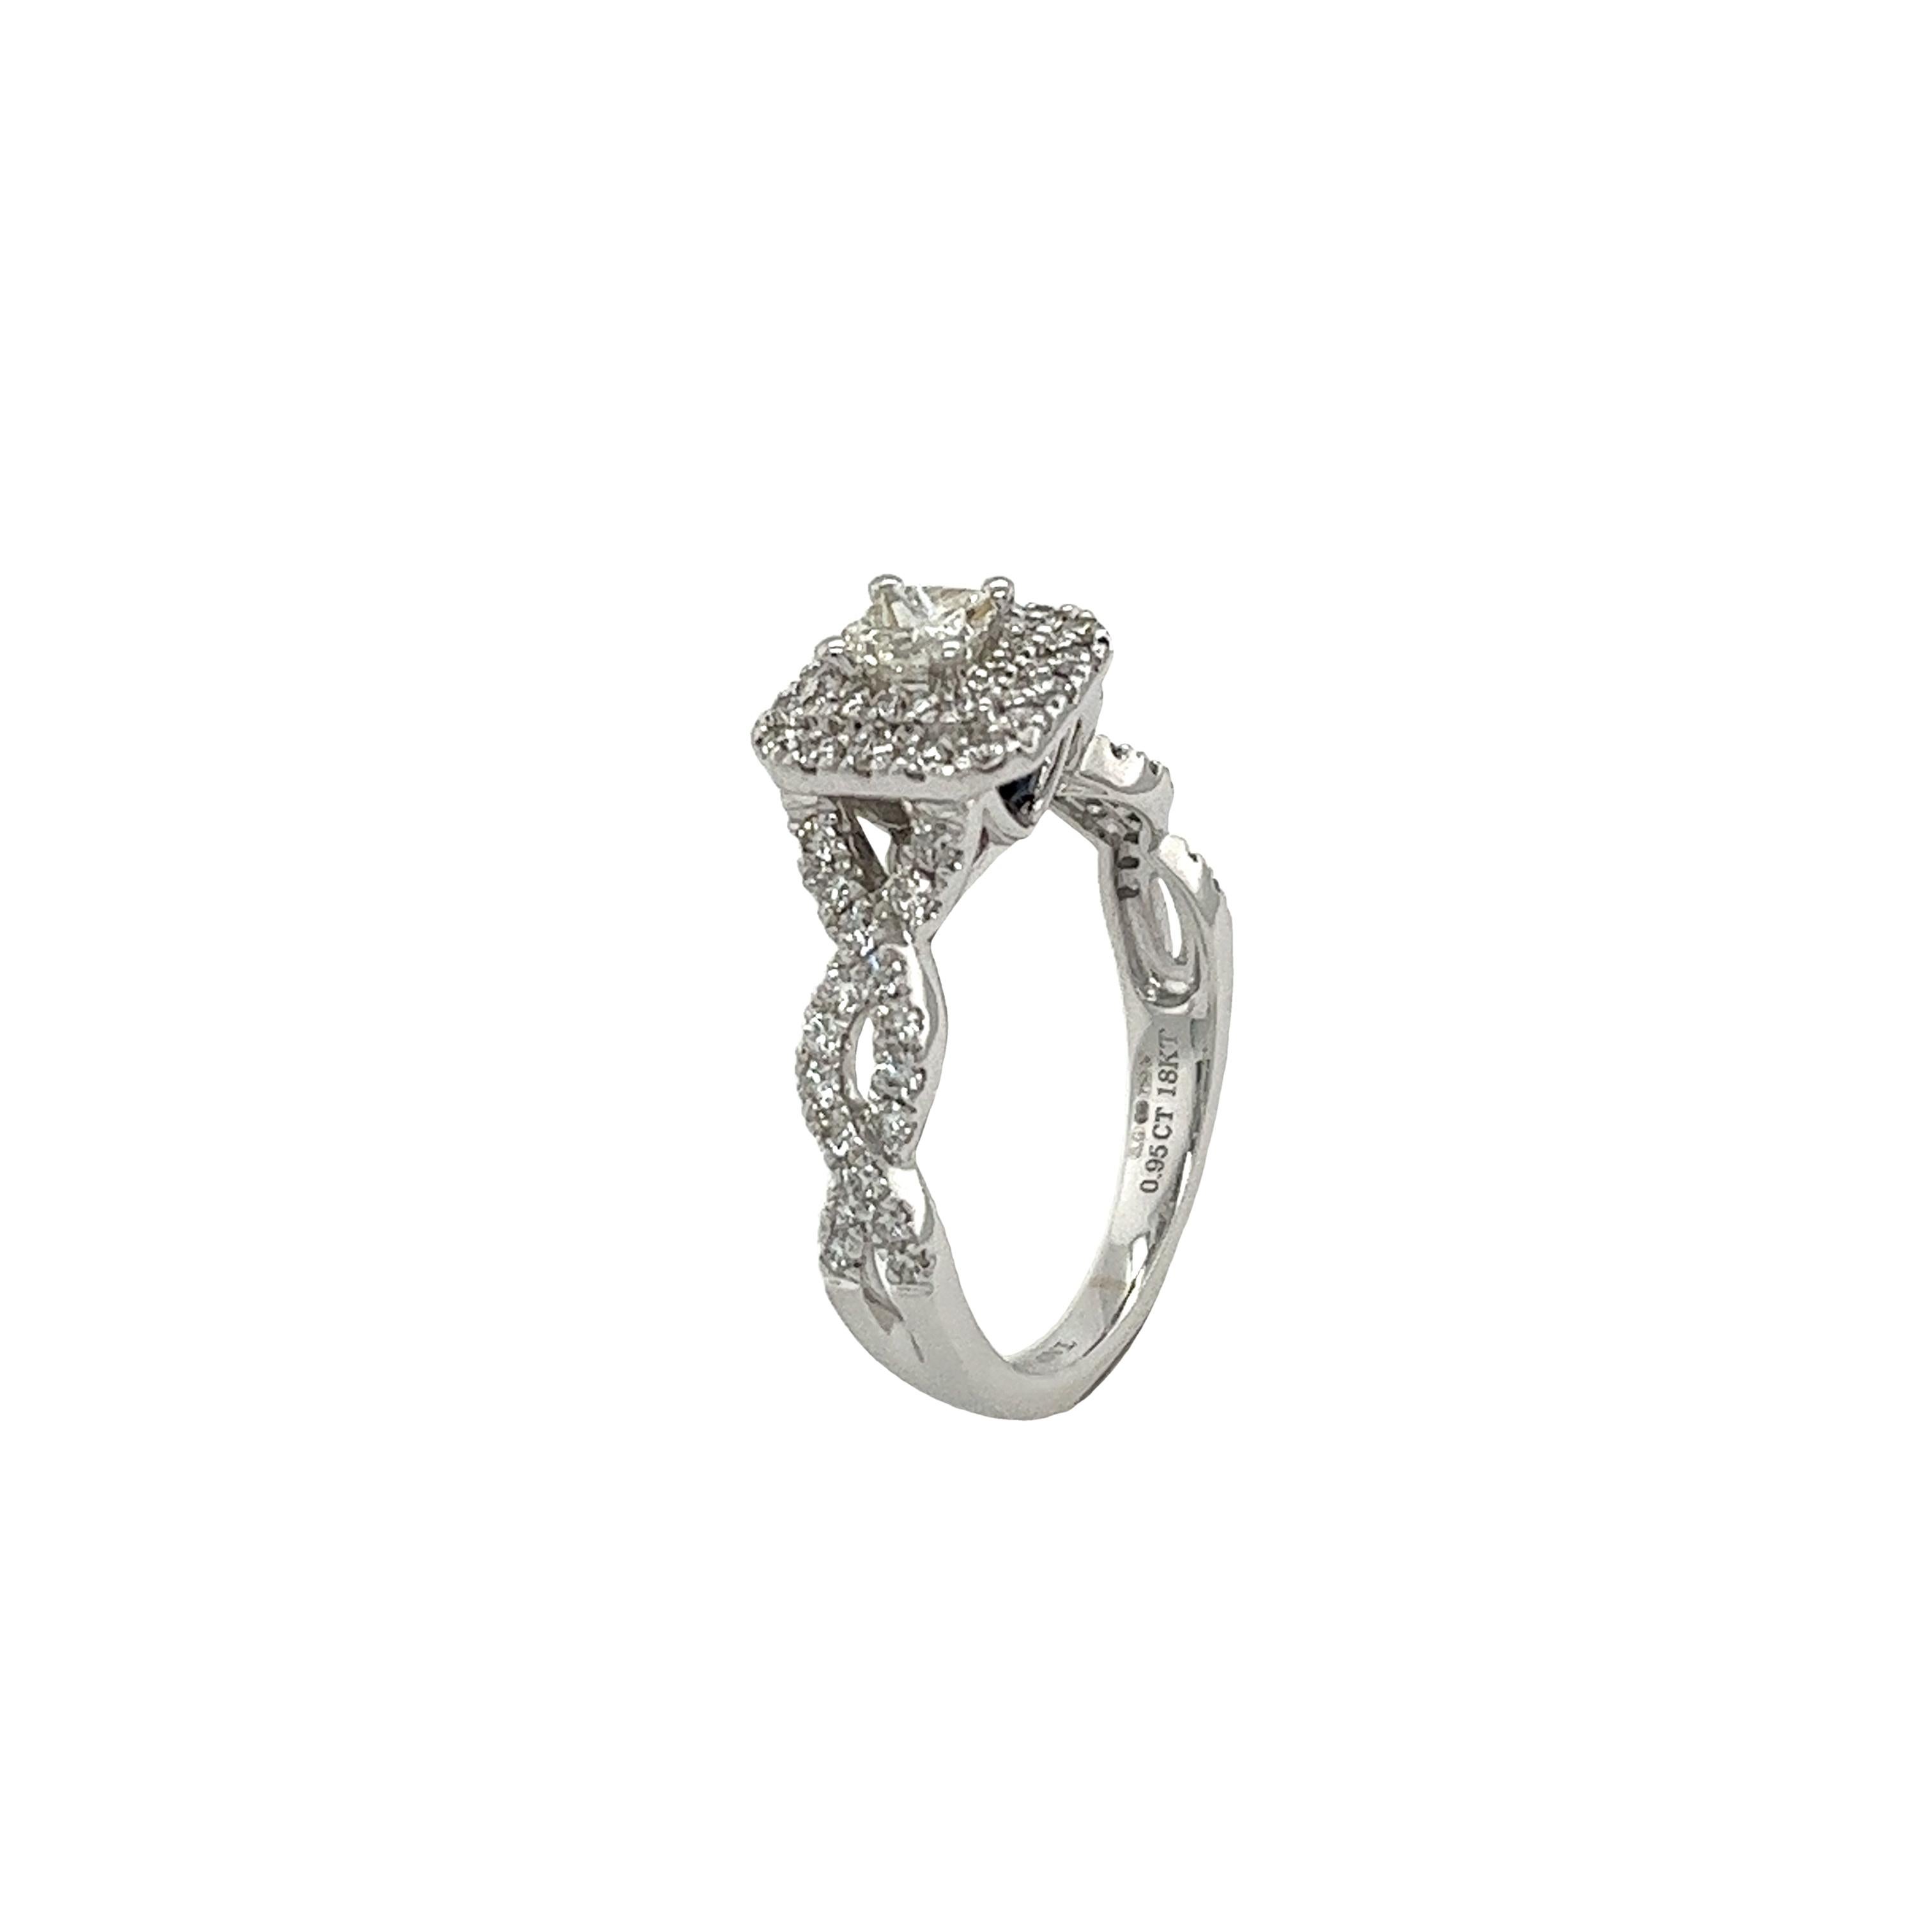 This dazzling Vera Wang Love cluster ring with 0.95ct of natural diamonds, making it the perfect style for a engagement ring. 
The ring is made of 18ct white gold.
Total Diamond Weight: 0.95ct
Diamond Colour: H
Diamond Clarity: SI
Width of Band: